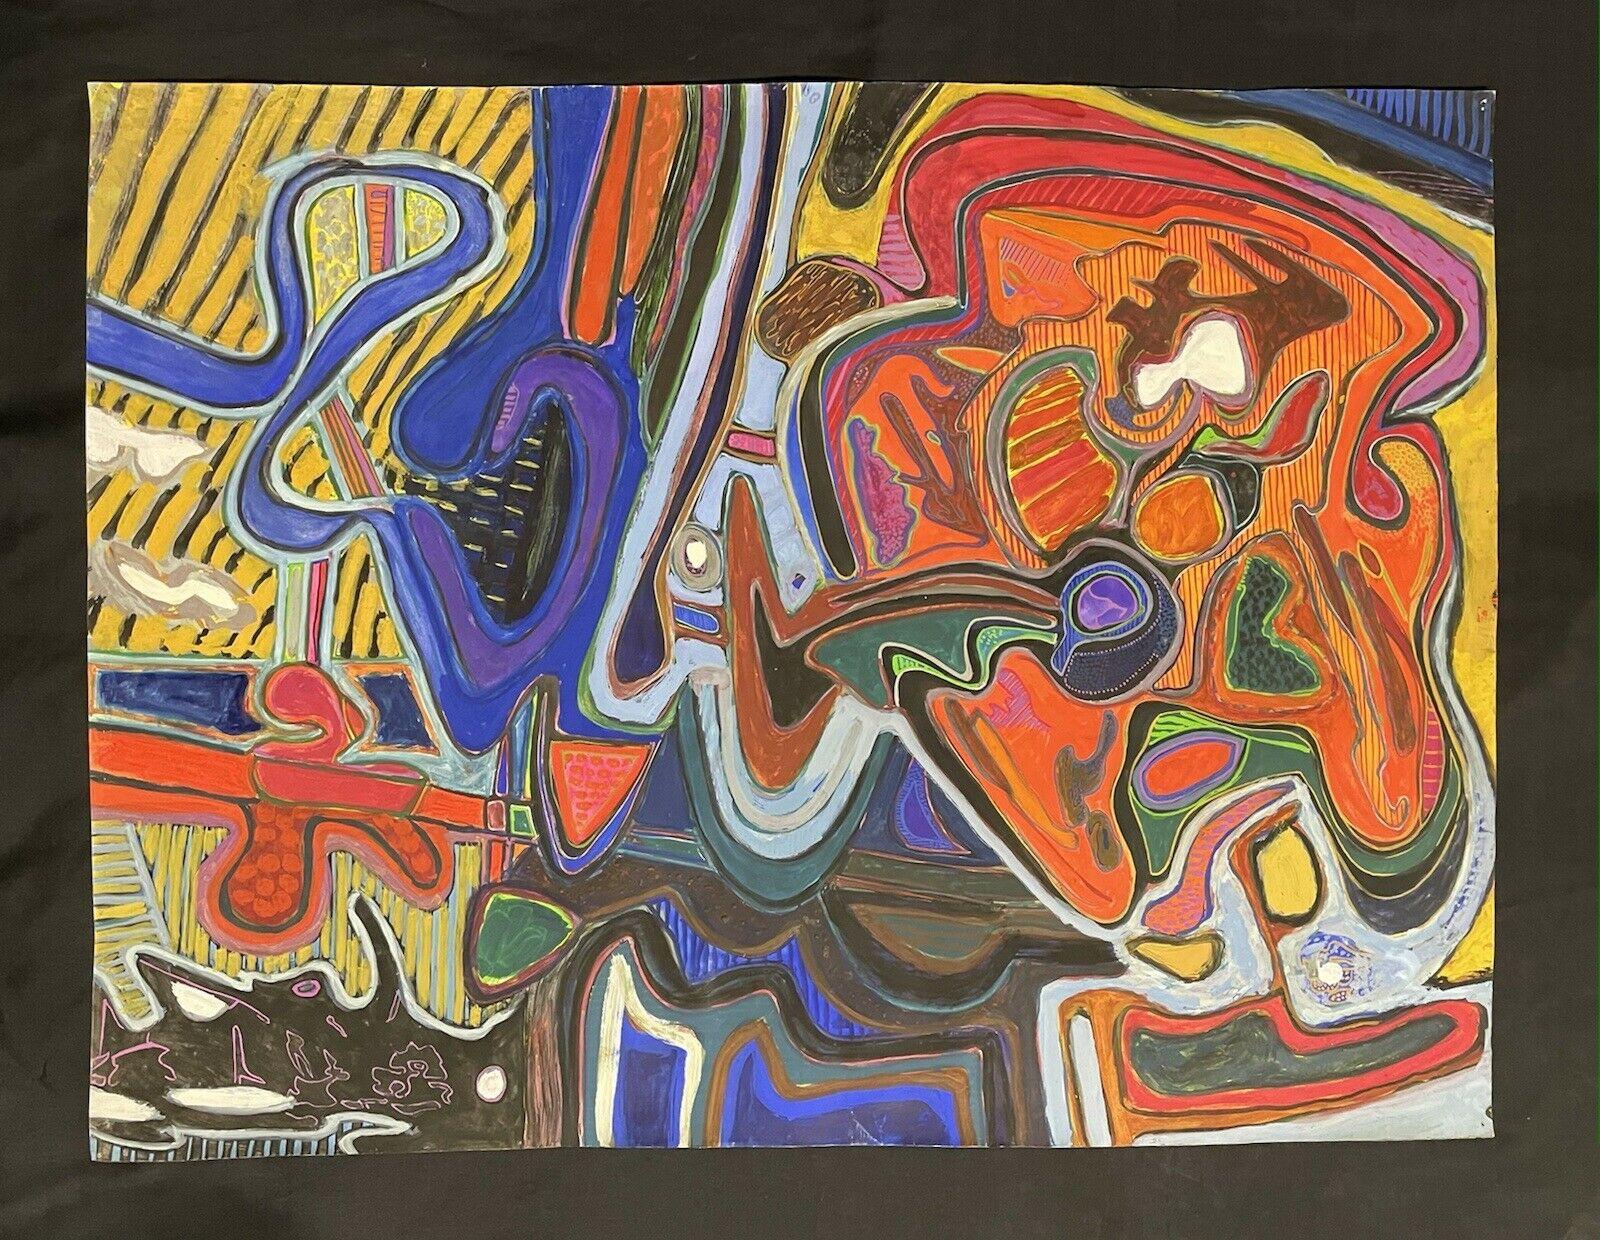 CLAUDE LAGOUCHE (1943-2020) HUGE 1970'S FRENCH PSYCHEDELIC ABSTRACT PAINTING - Painting by Claude Lagouche